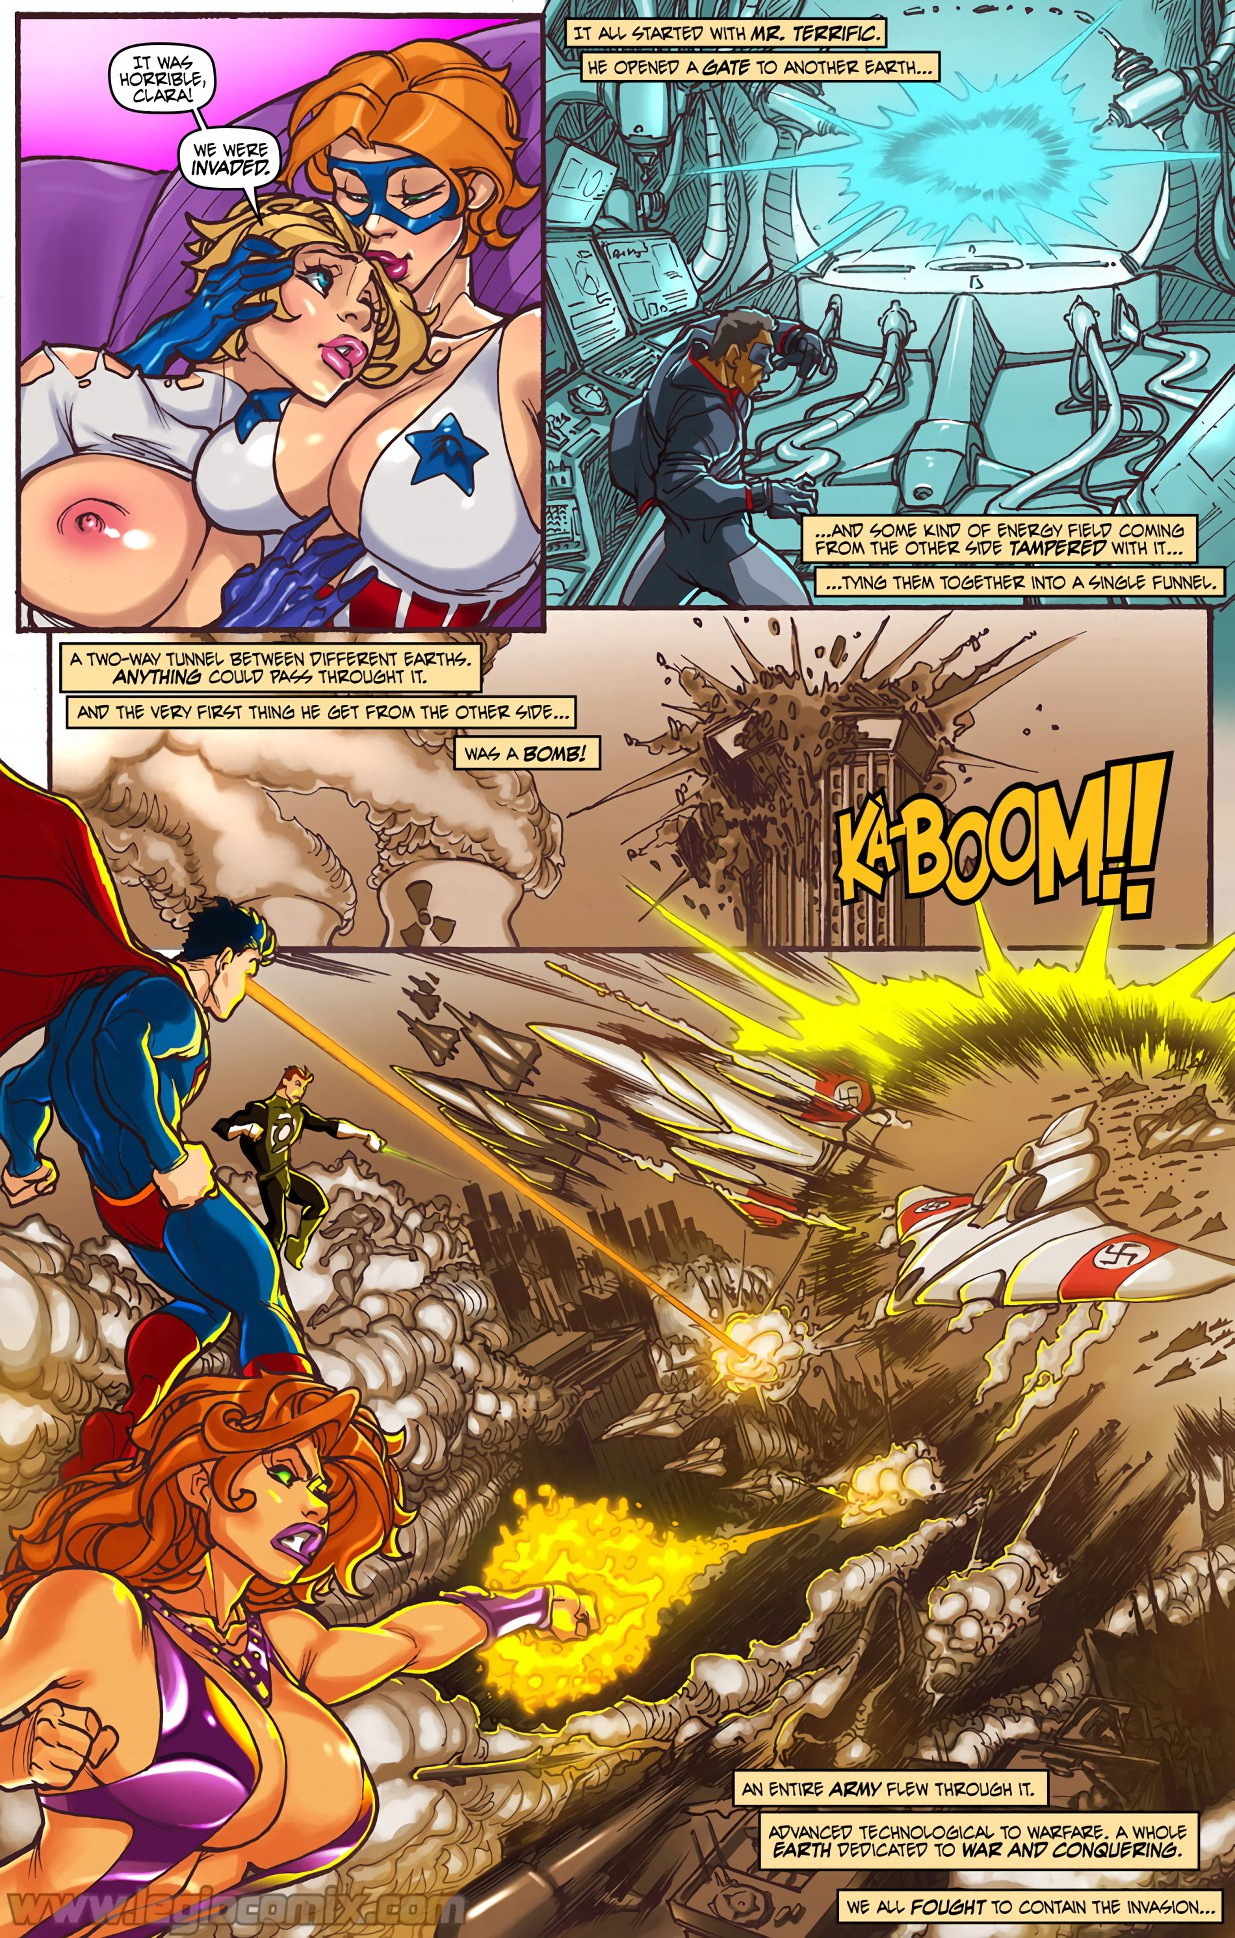 Power & Thunder - Another Worlds - Page 16